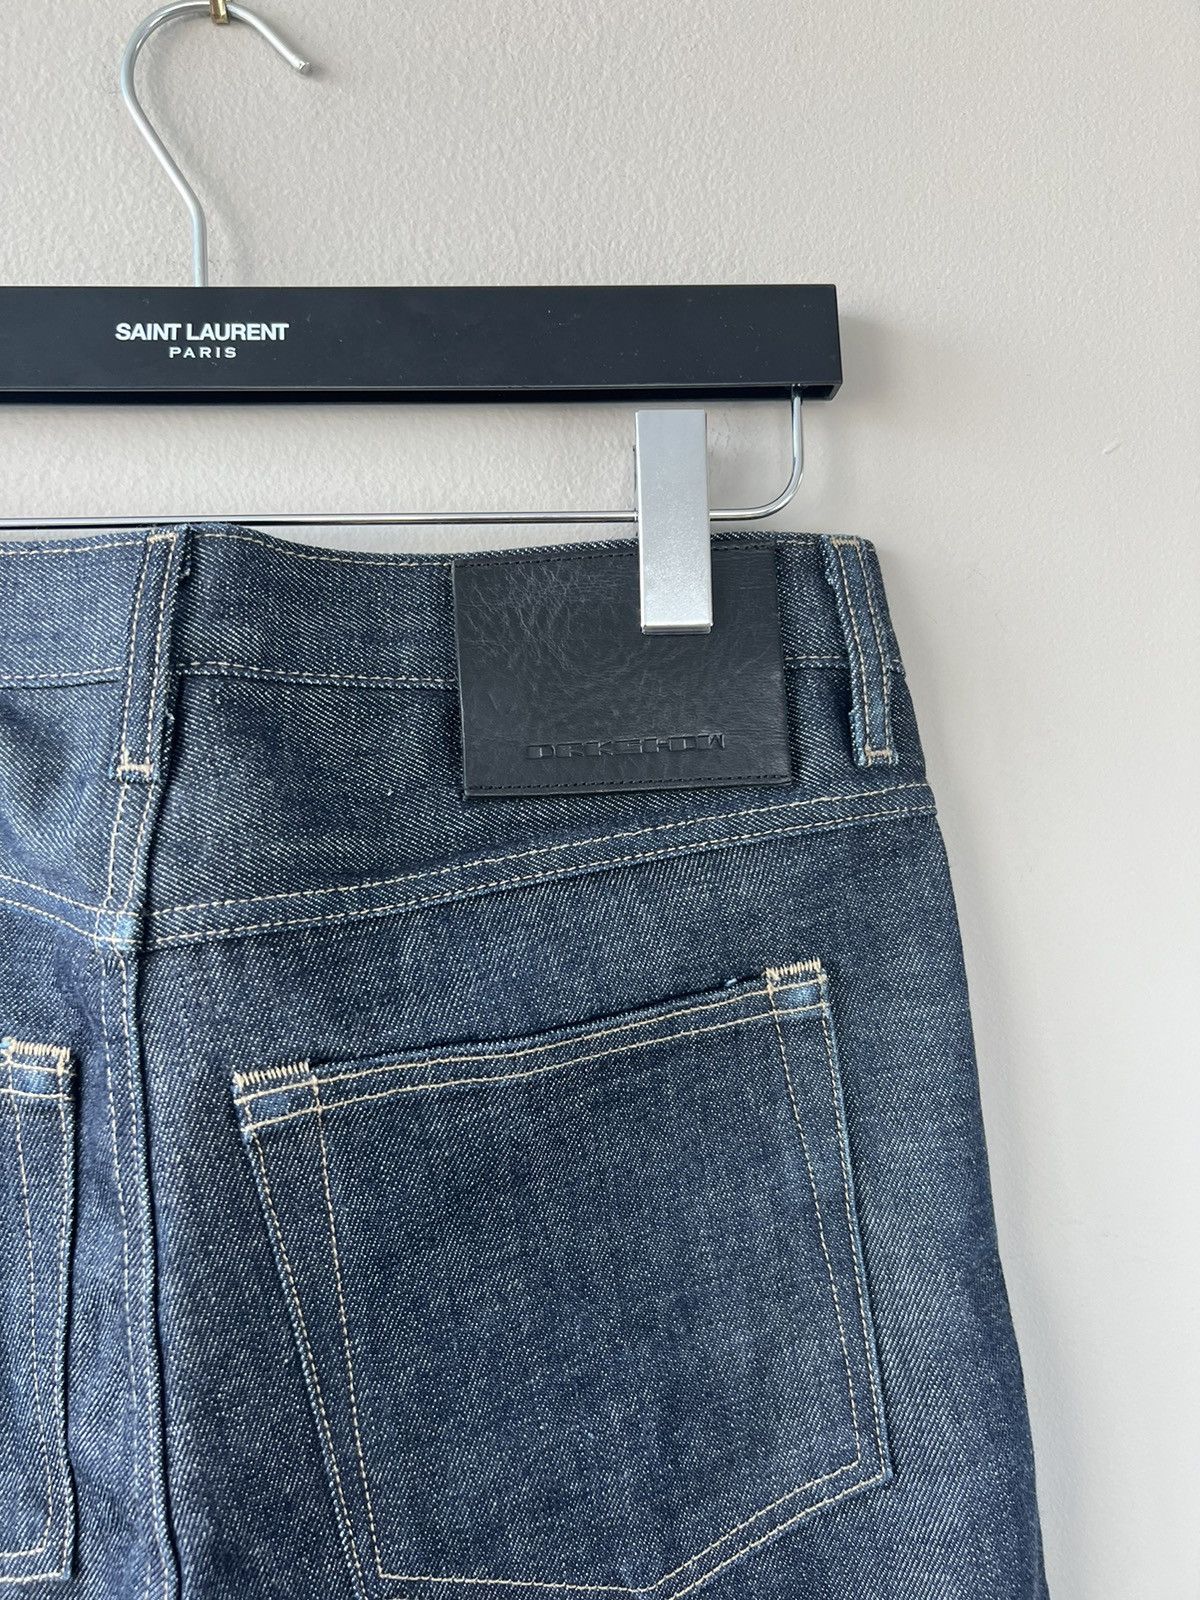 Selvedge Torrence Cut Made in Los Angeles Denim - 4